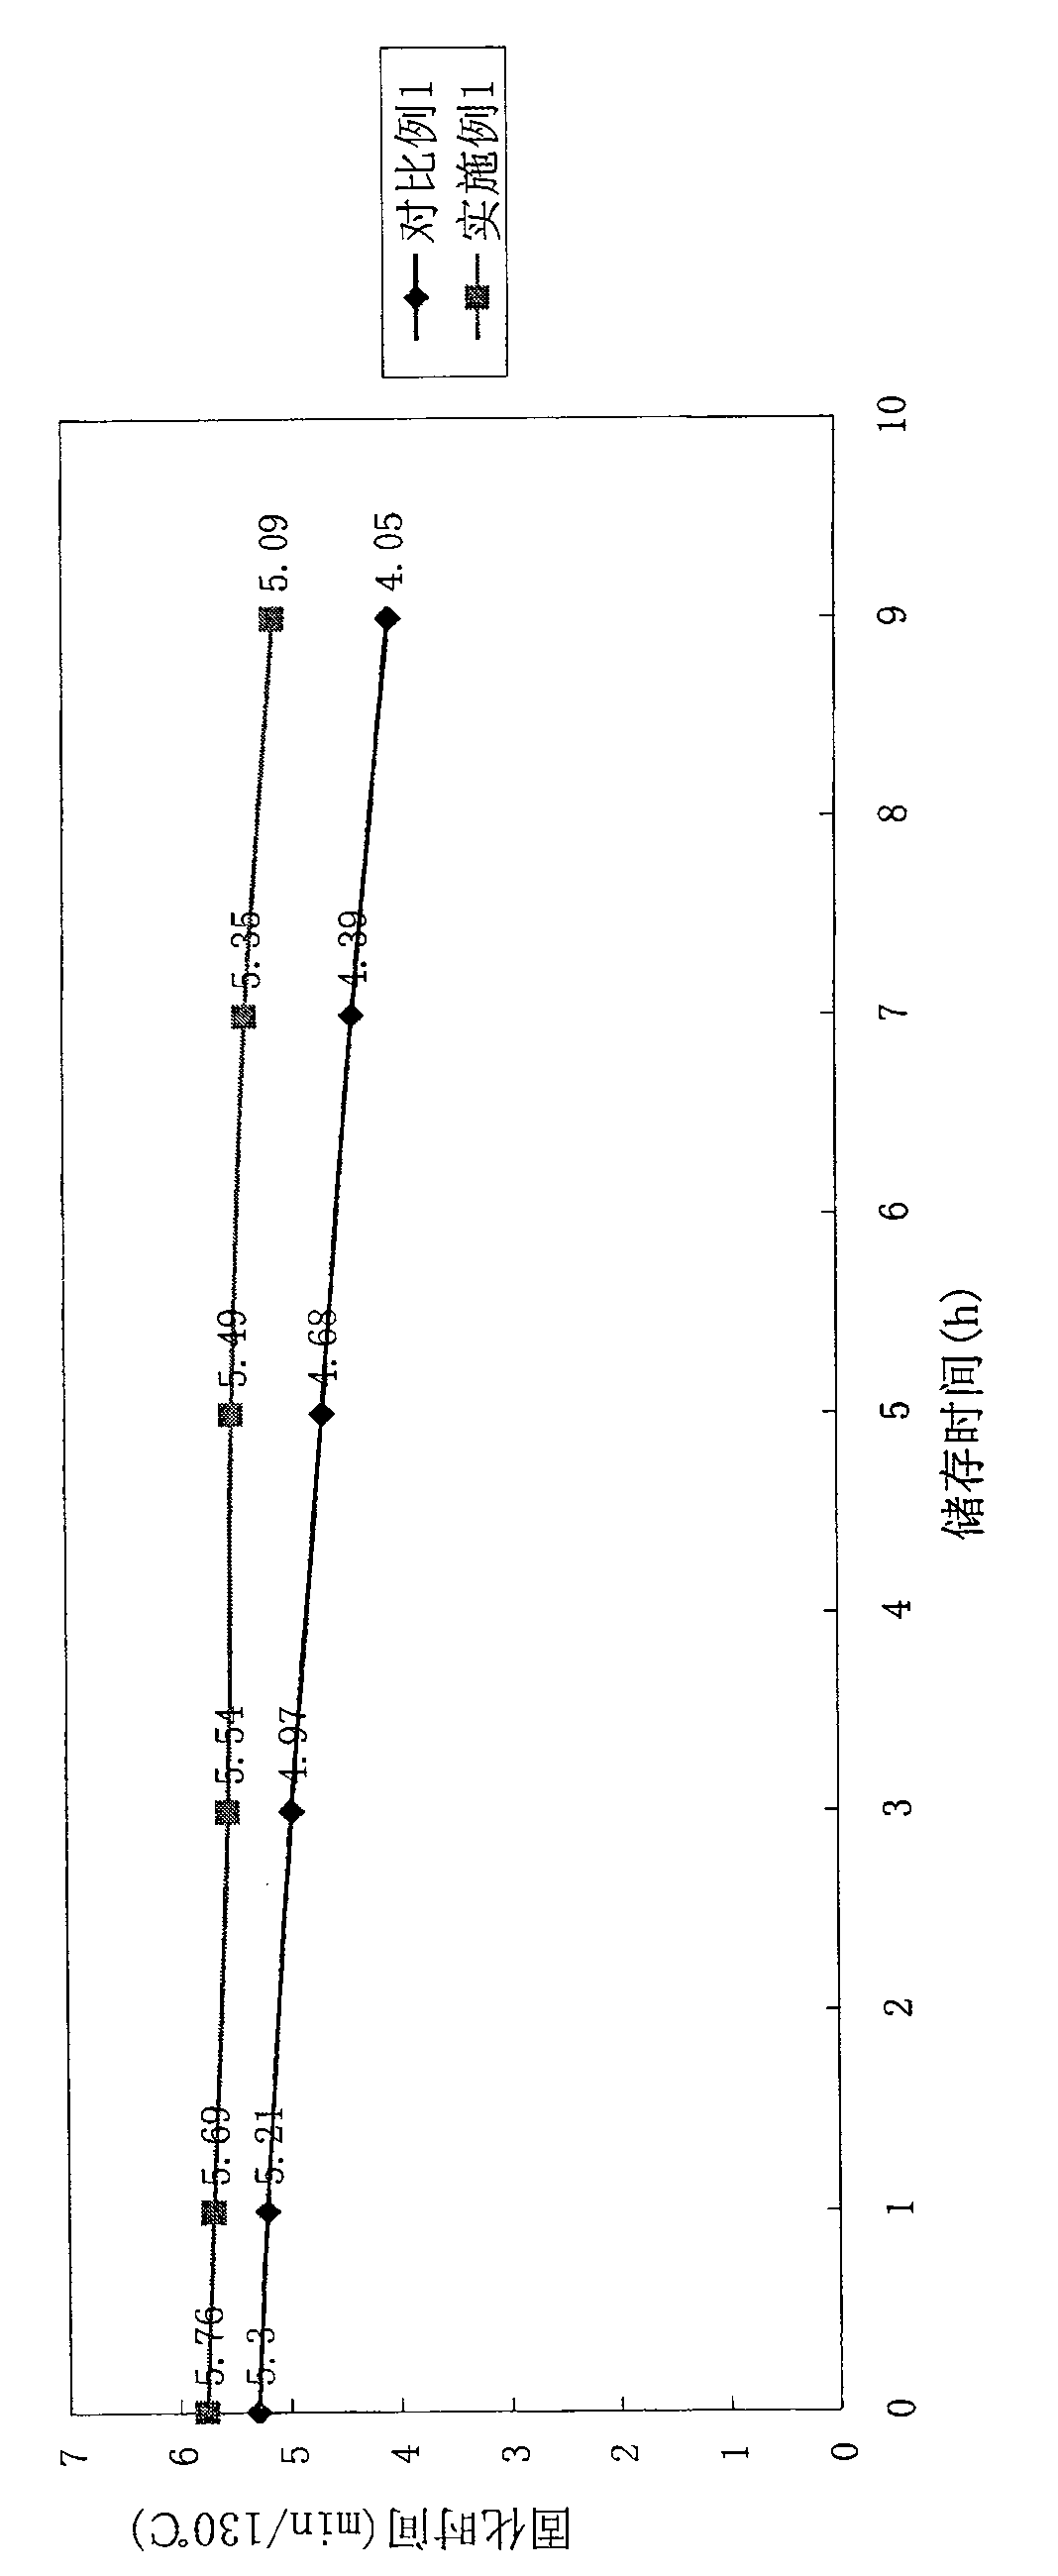 Highly-water-soluble thermosetting phenolic resin and method for synthesizing the same